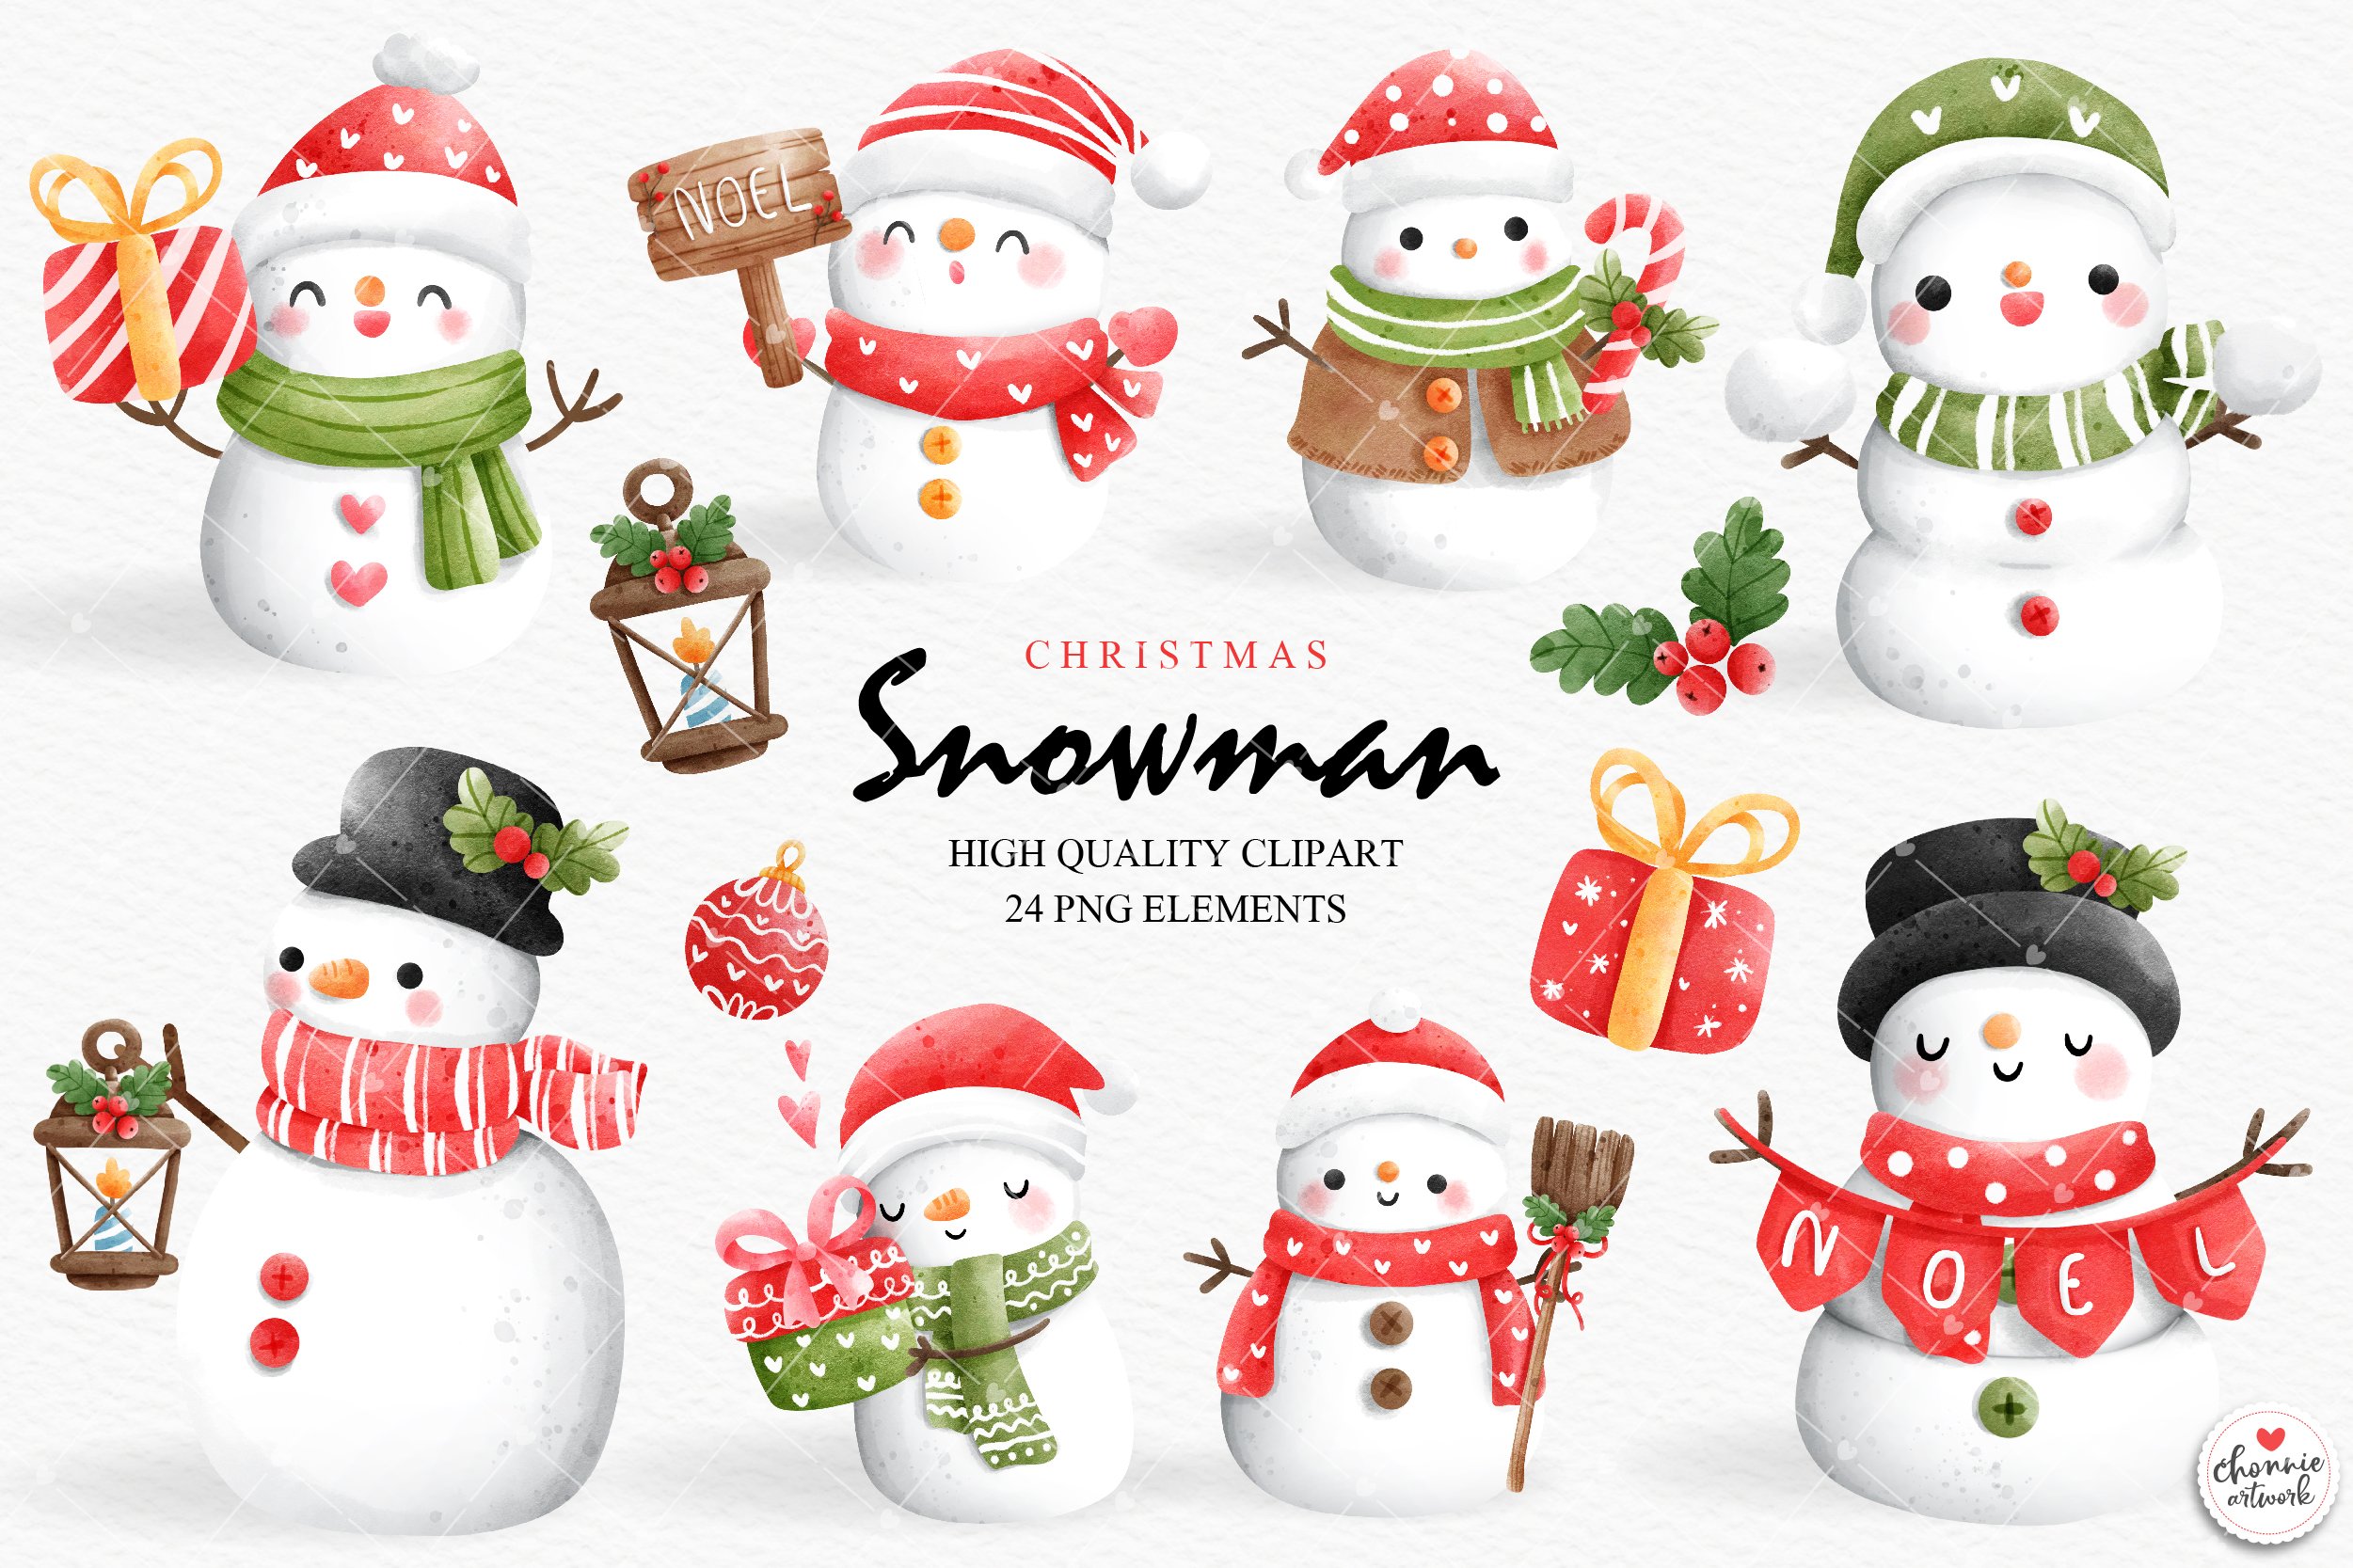 Funny snowman collection for your Christmas cards.